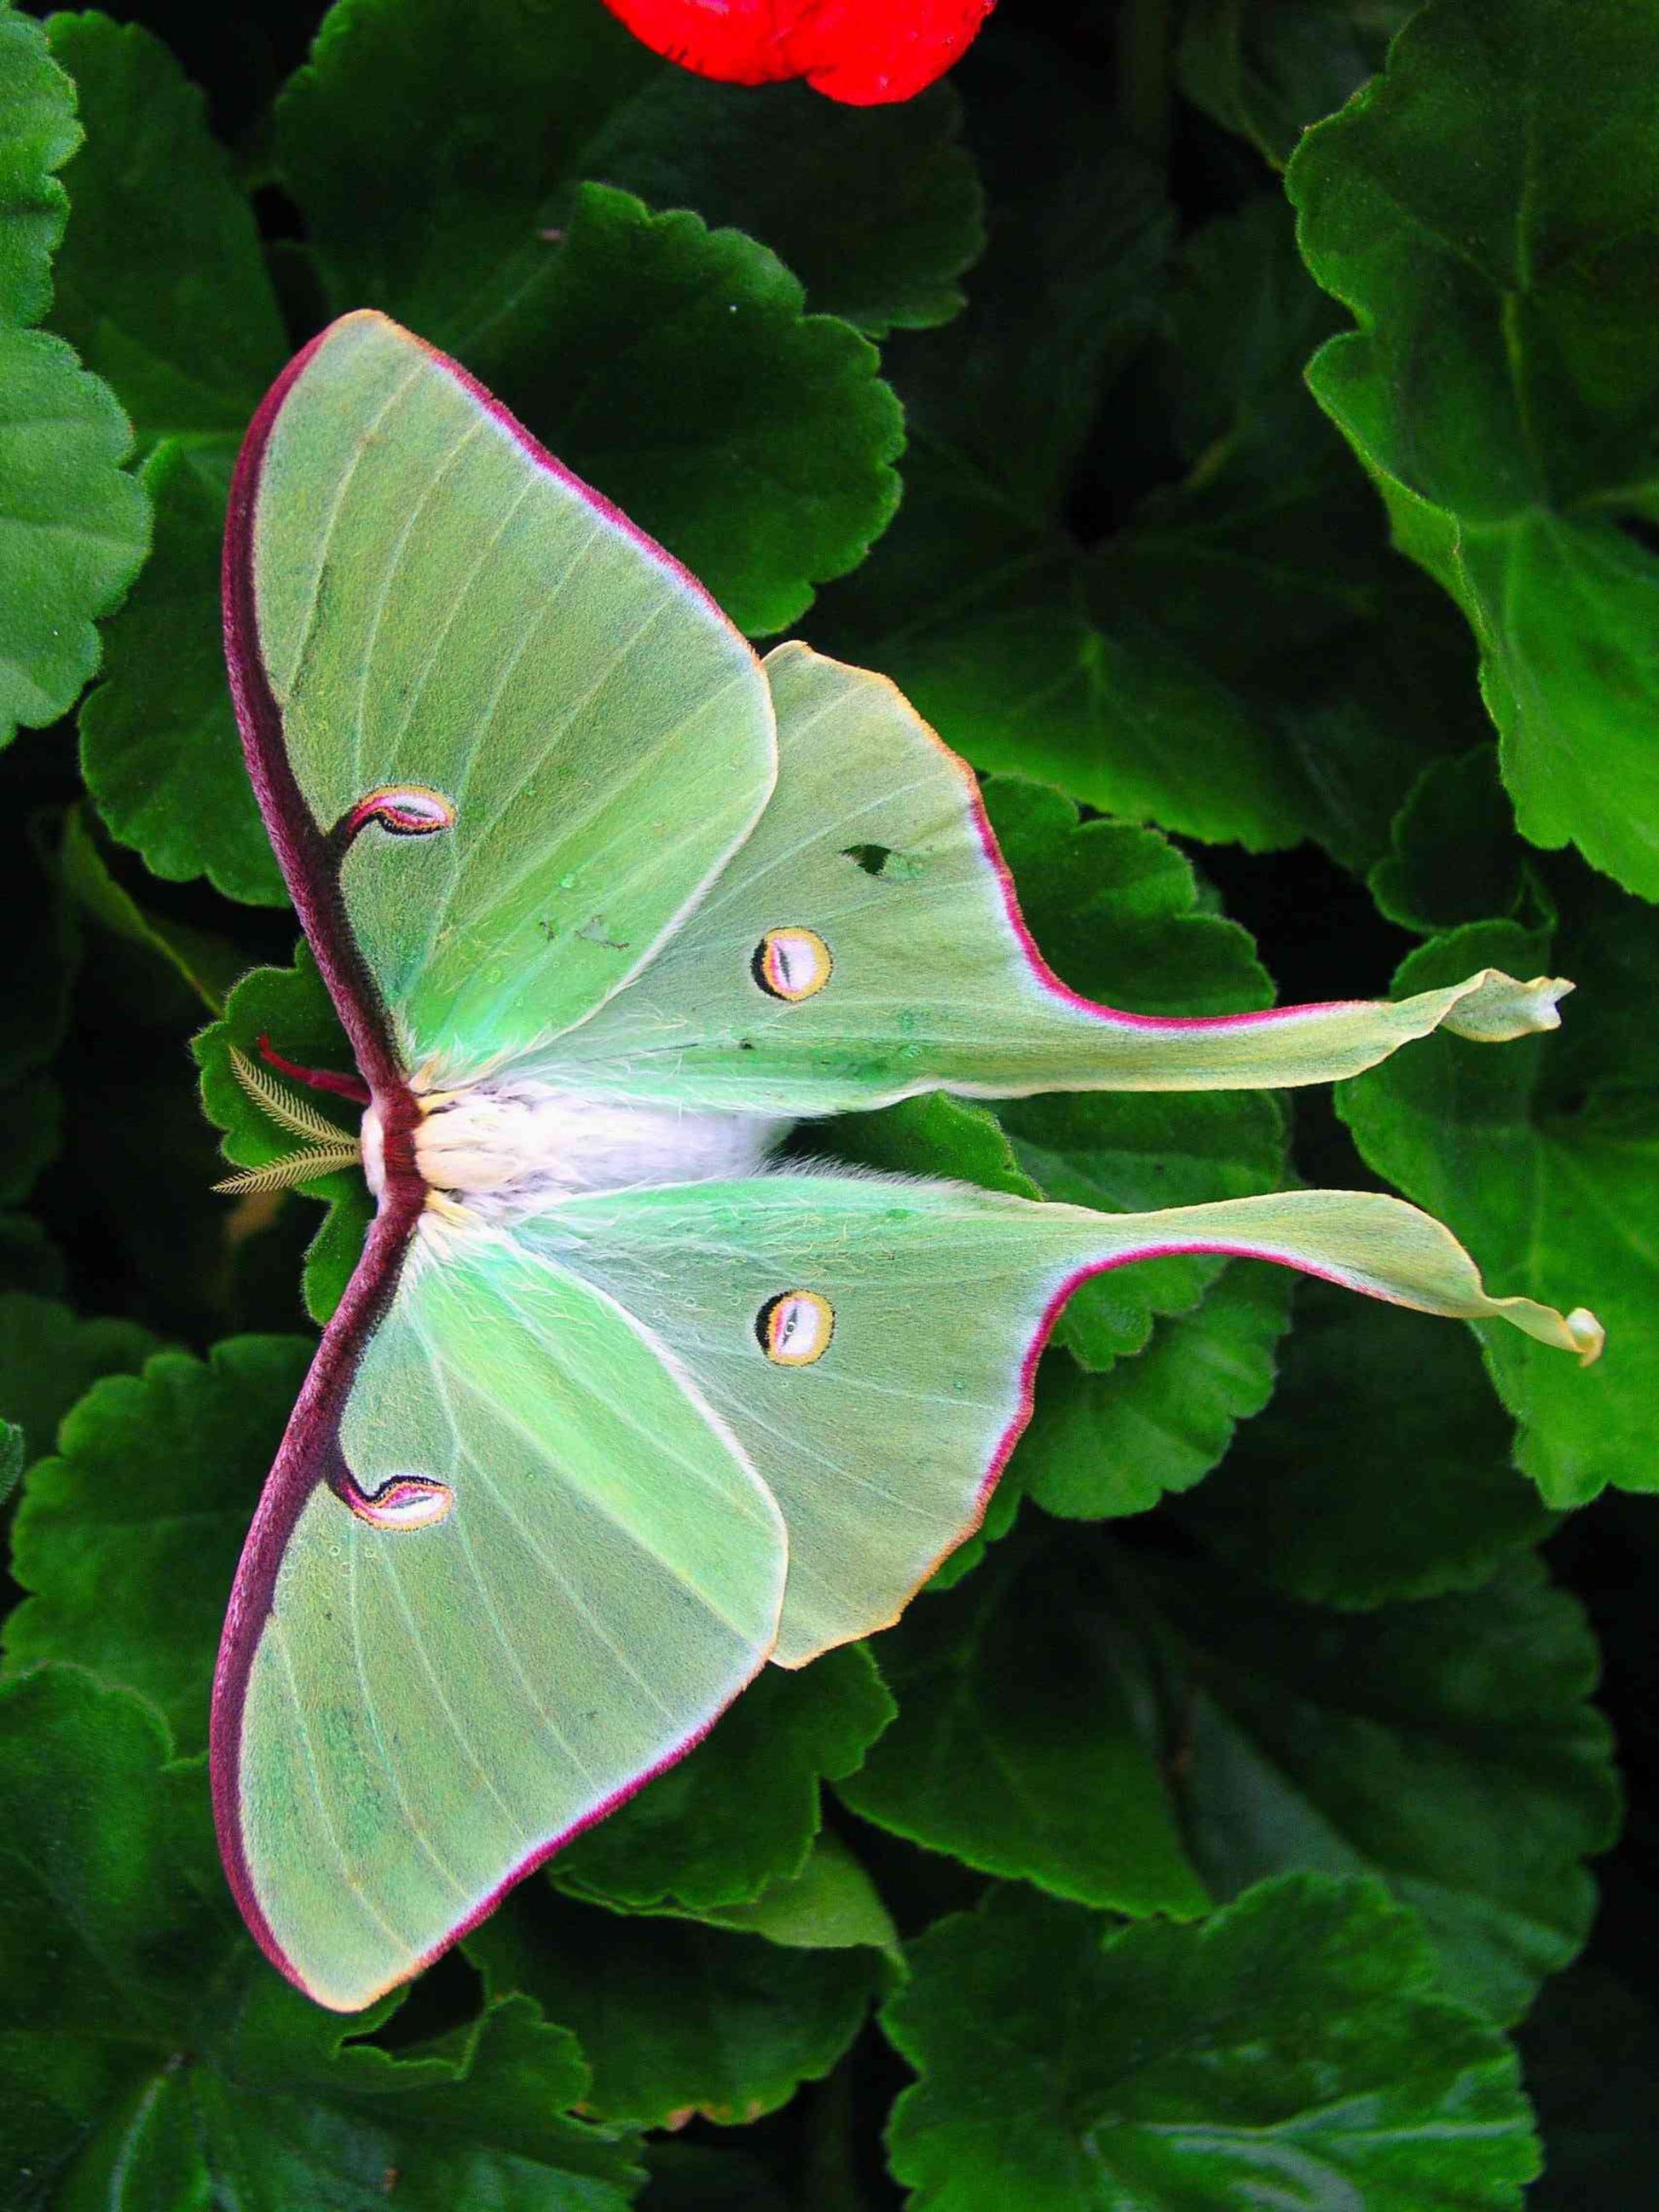 luna moth uses winged sums as his host plant